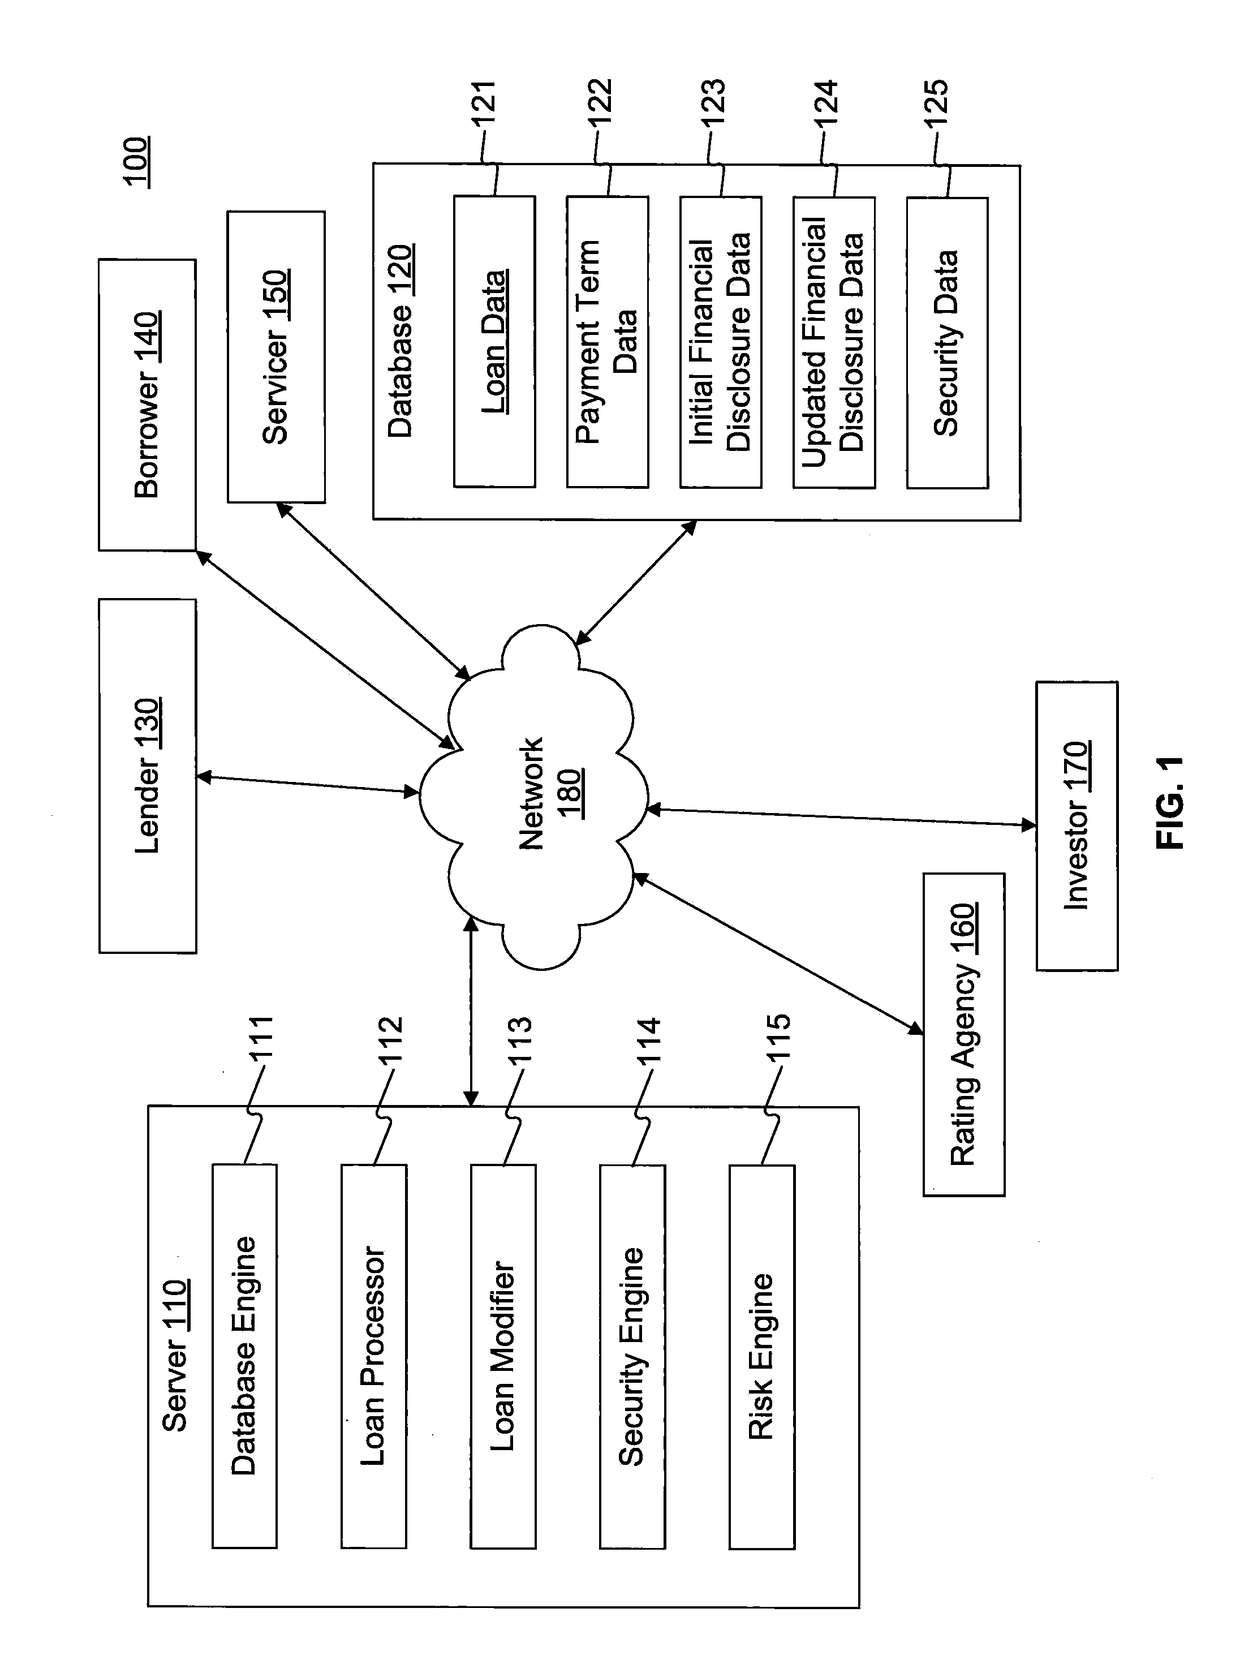 Systems and methods for selecting loan payment terms for improved loan quality and risk management